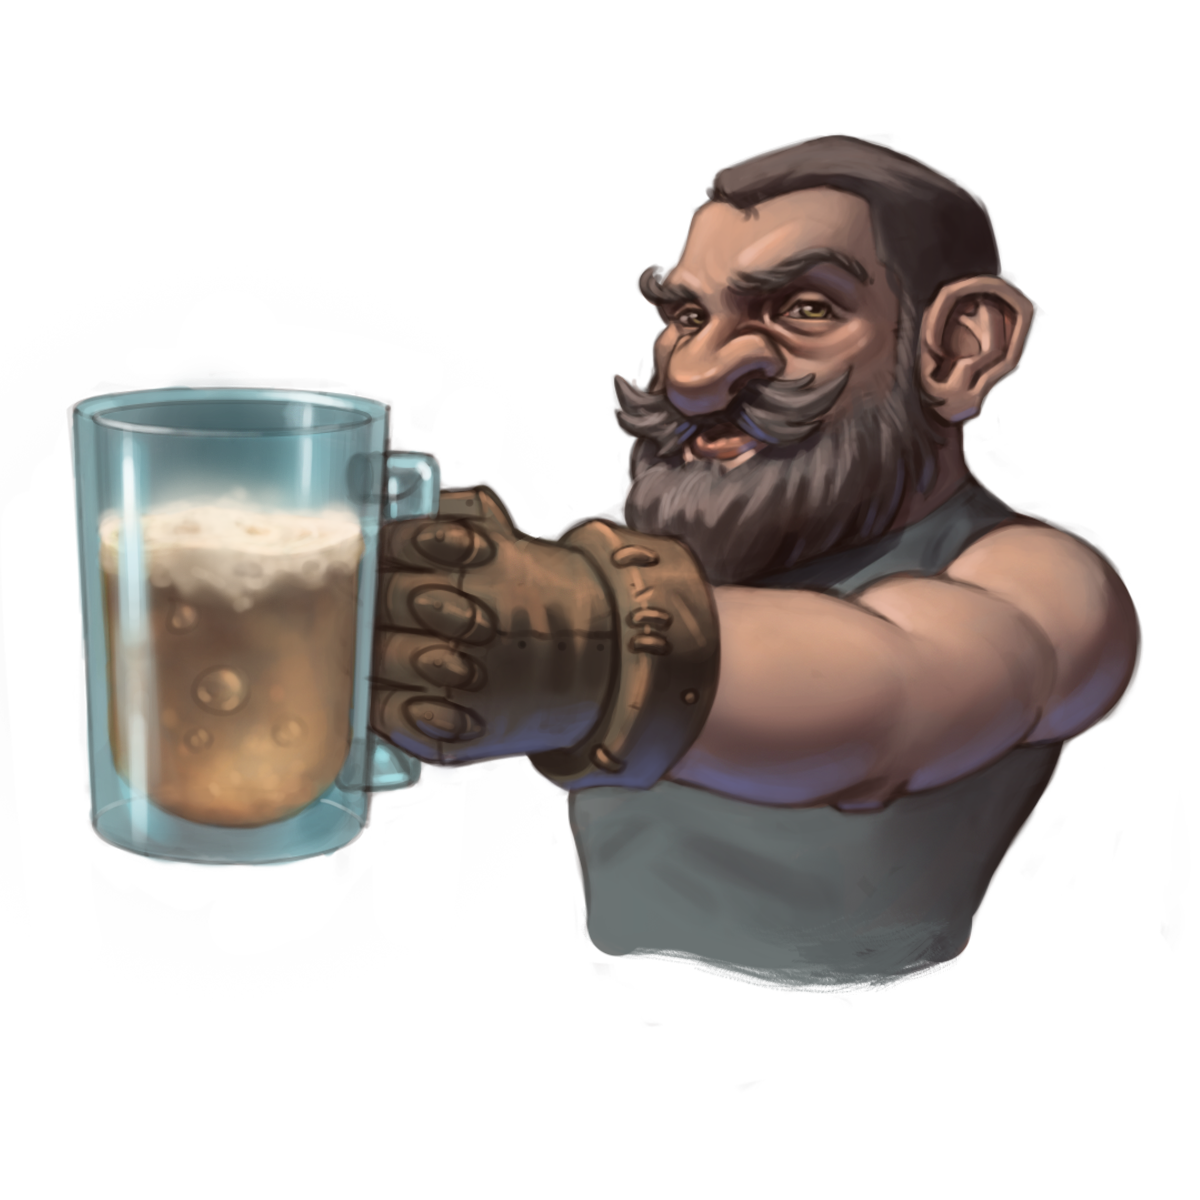 A dwarven man raises a frothy mug of beer in a toast